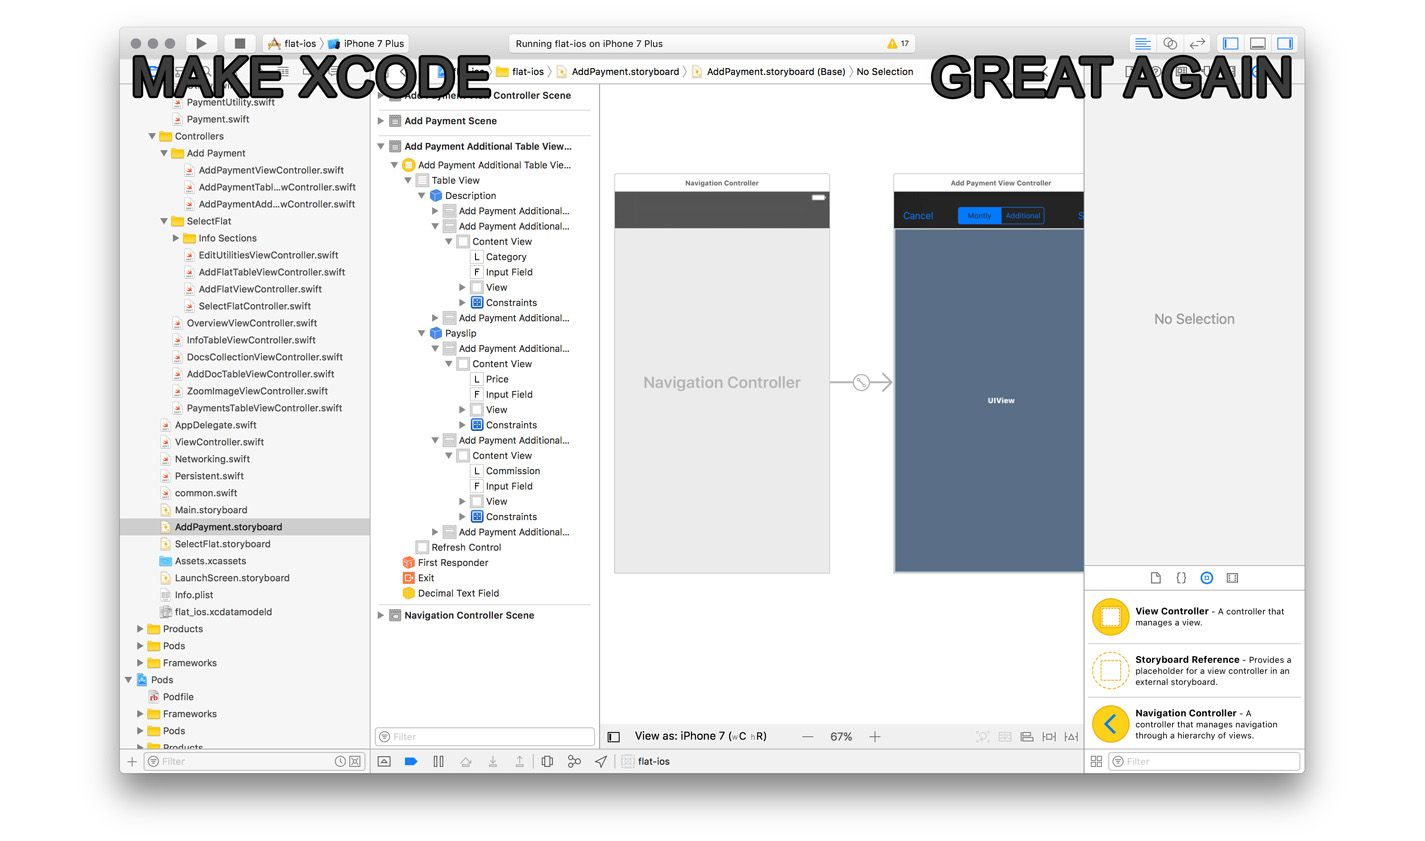 Sunday is another good day to fix the Xcode